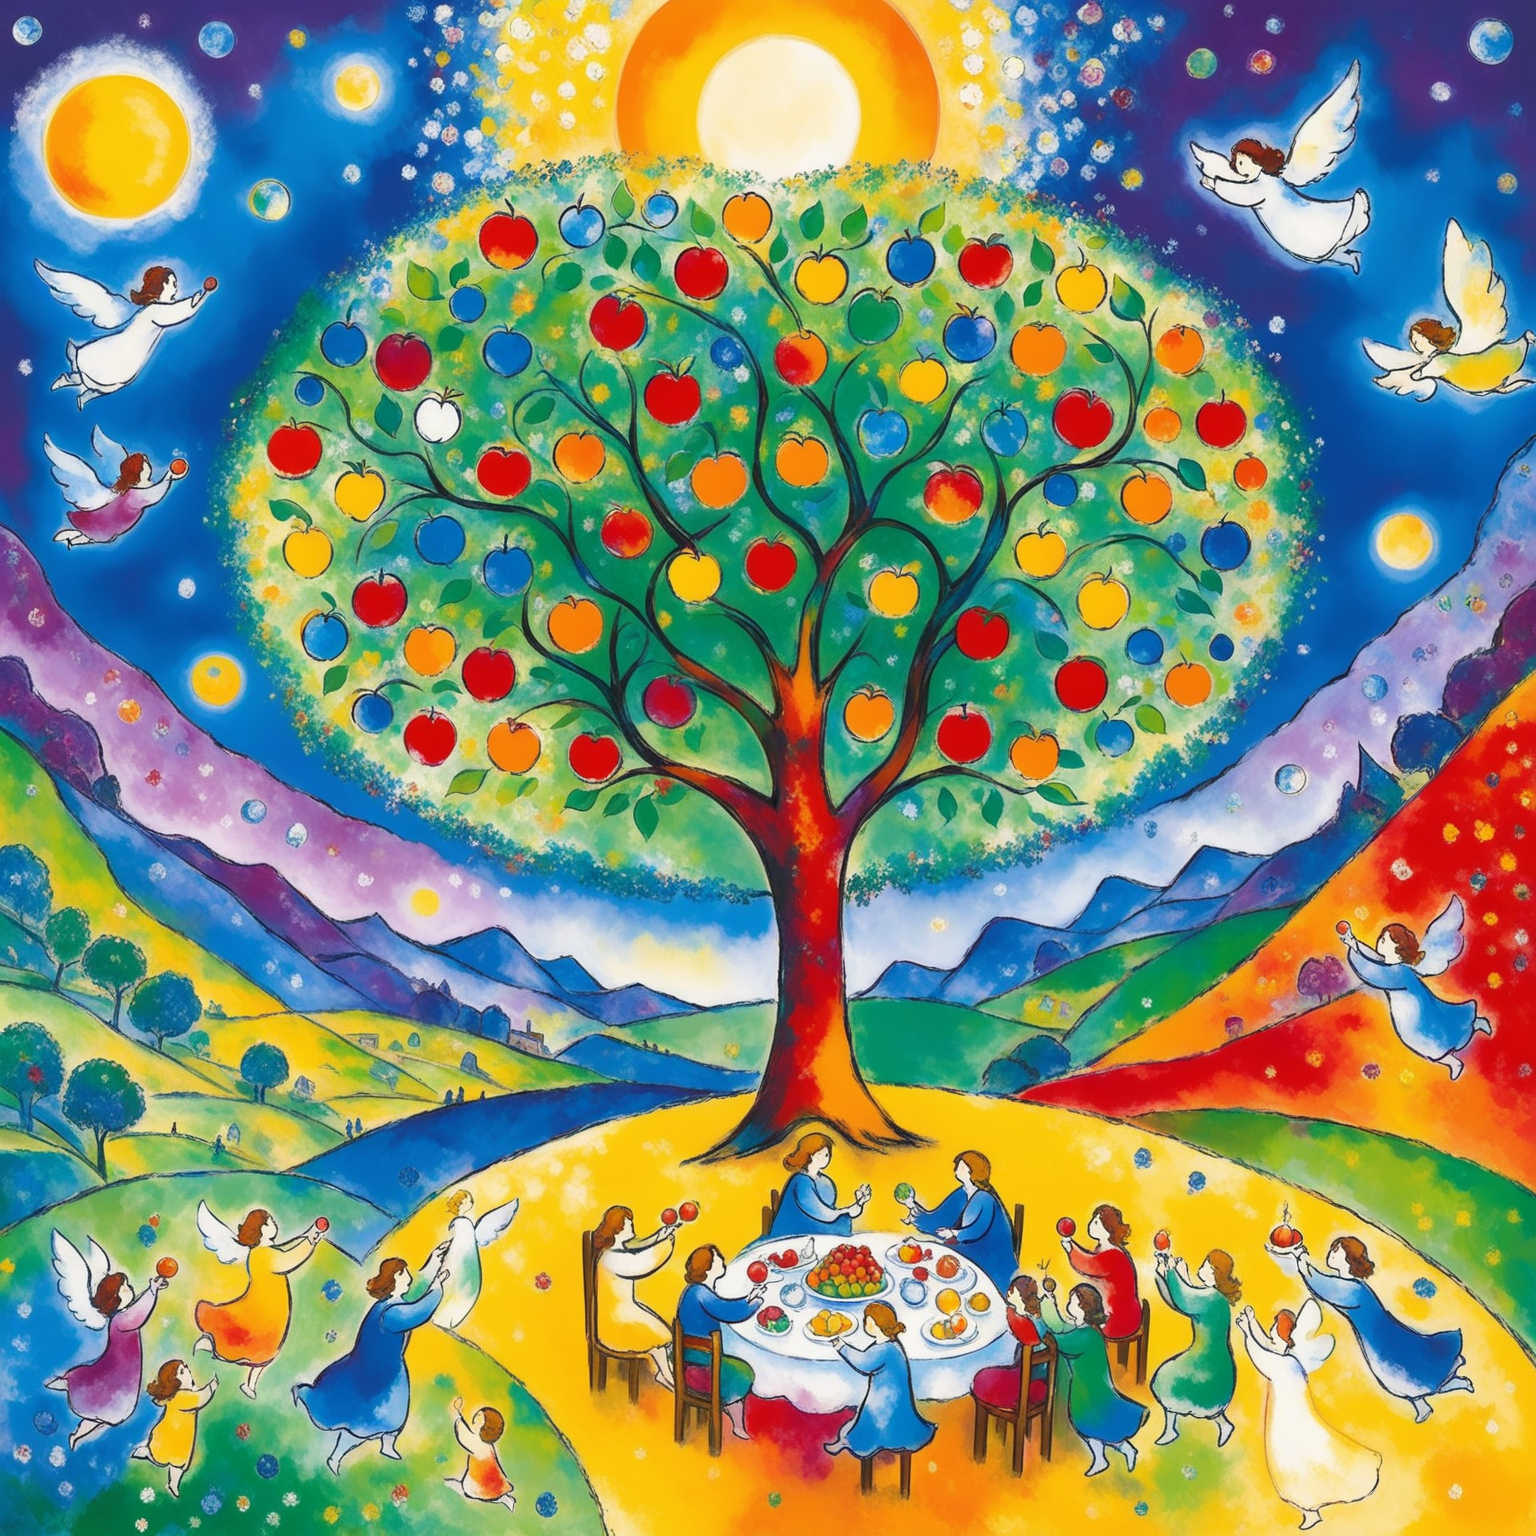 Generate a picture in the style of the artist Marc Chagall ,  a single tree using bright red, green, blue, yellow white and orange colors, give it more sky than land and add an  angel floating randomly  plus mana from a haven with a small group feasting on fruit